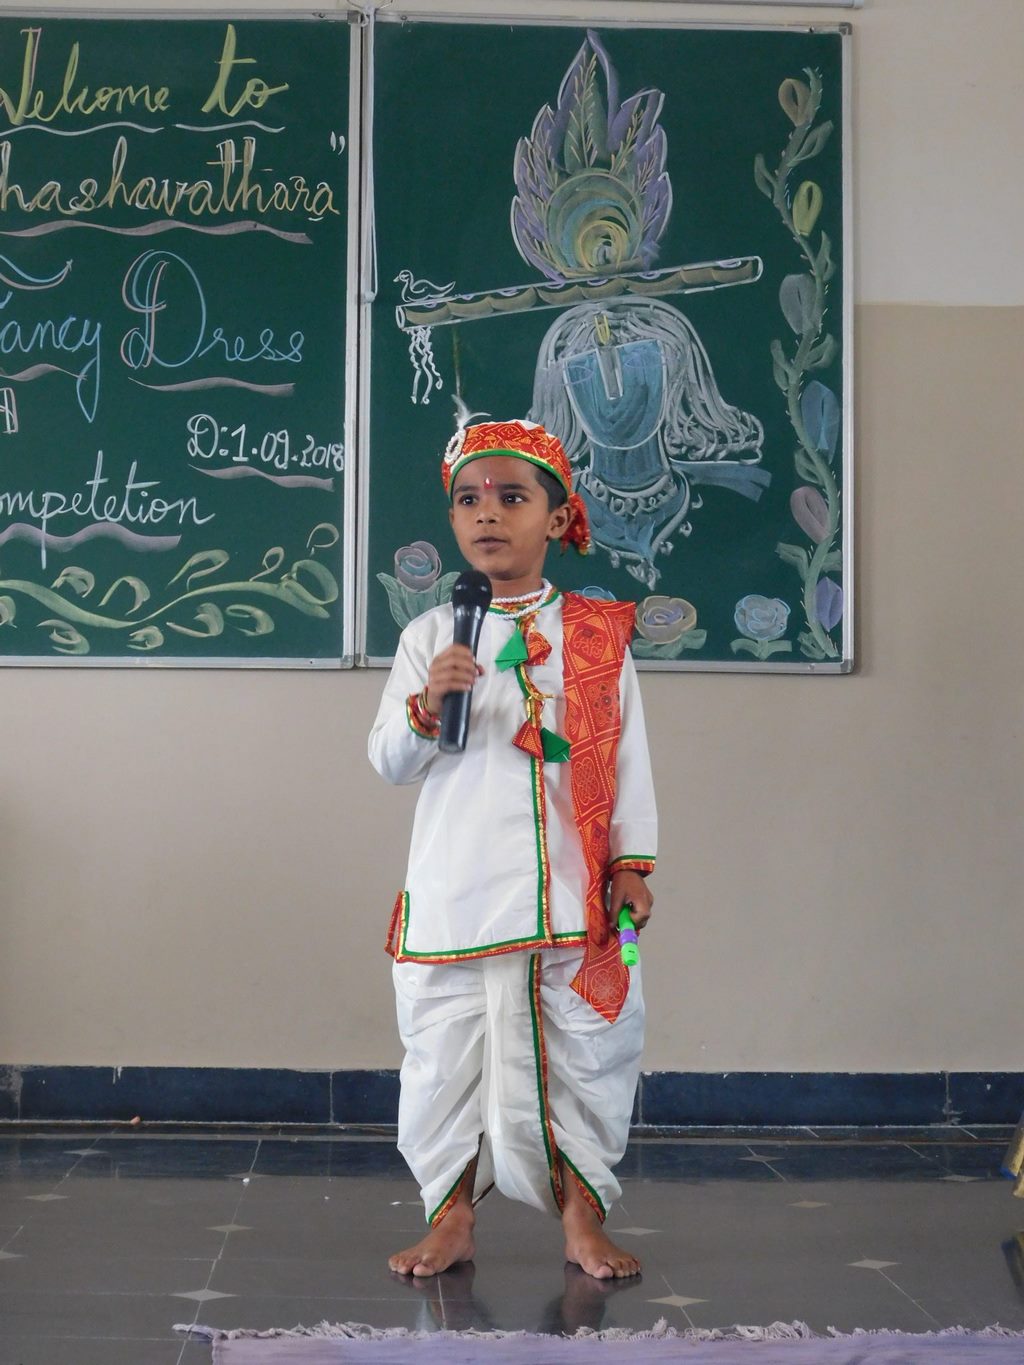 The Rustomjee Cambridge (Thane) Diaries: Jr. Kg - Show and Tell and Dress up  day - National Leaders - 12th August, 2016